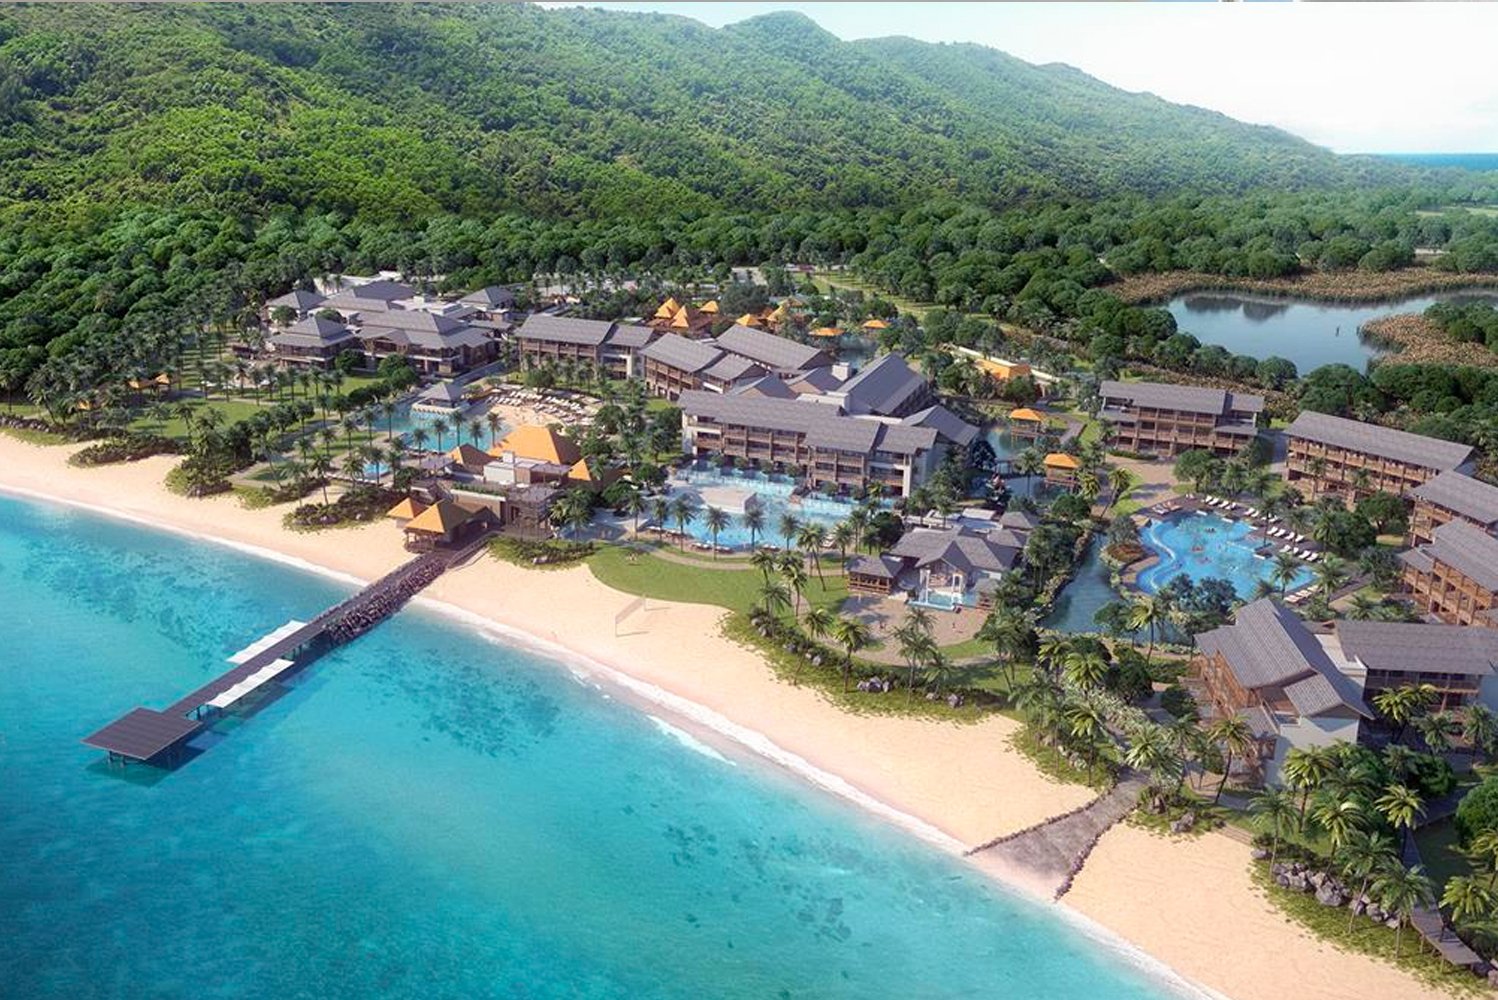 Cabrits Resort  Spa Kempinski Dominica has opened as the second venture of Kempinski Hotels in this region and Dominicas 